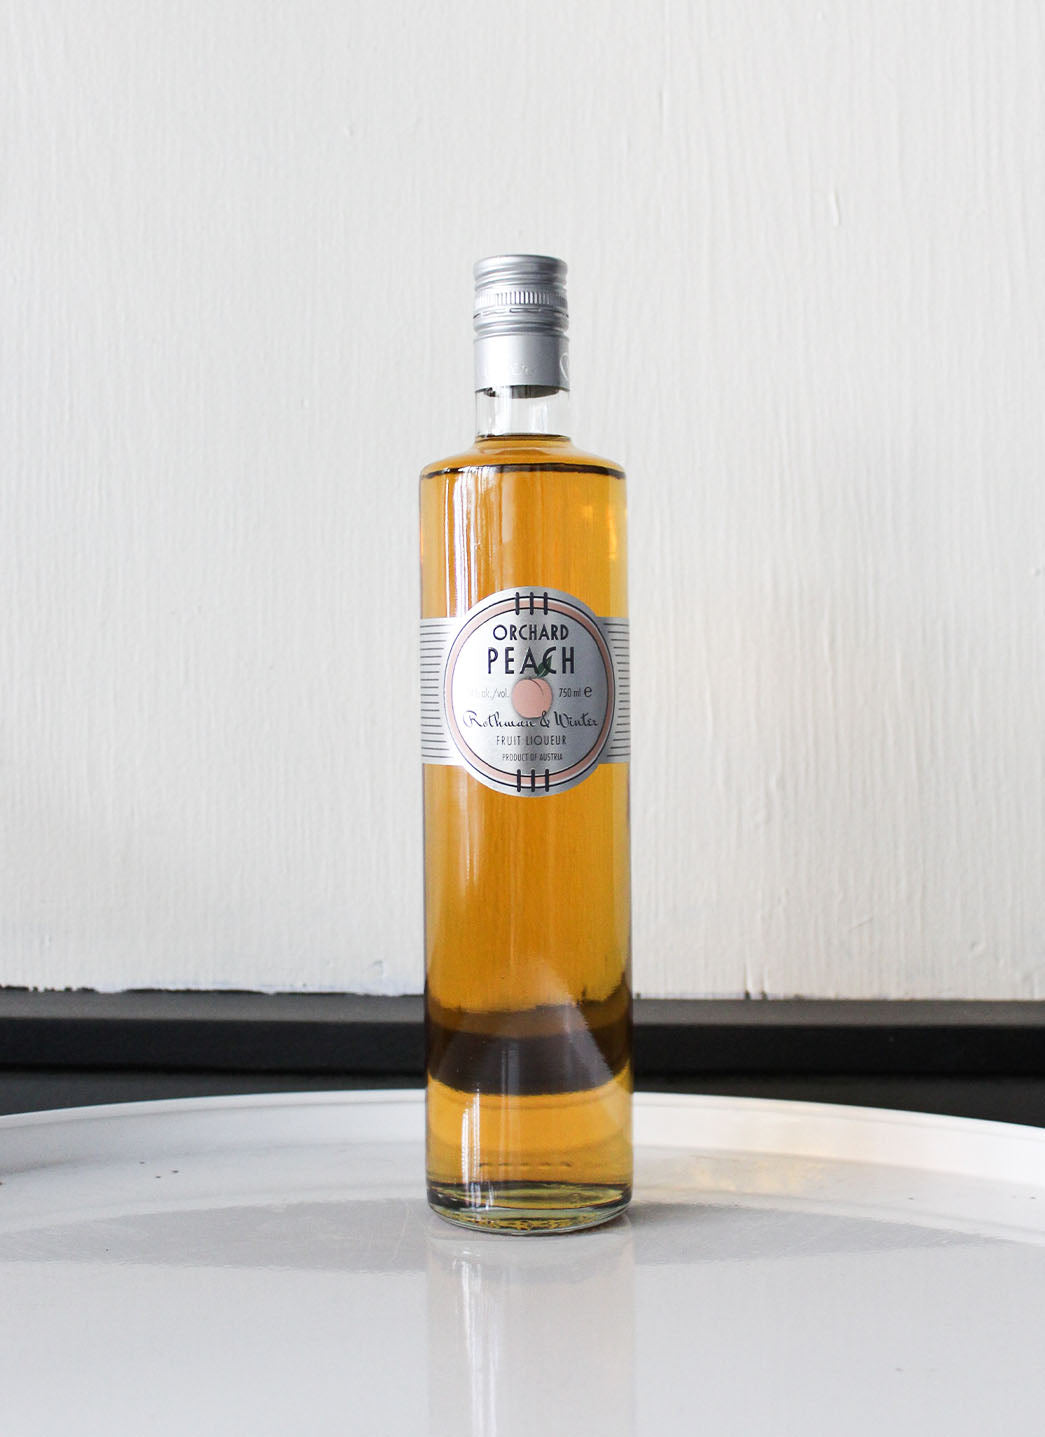 Rothman and Winter Orchard Peach Liqueur